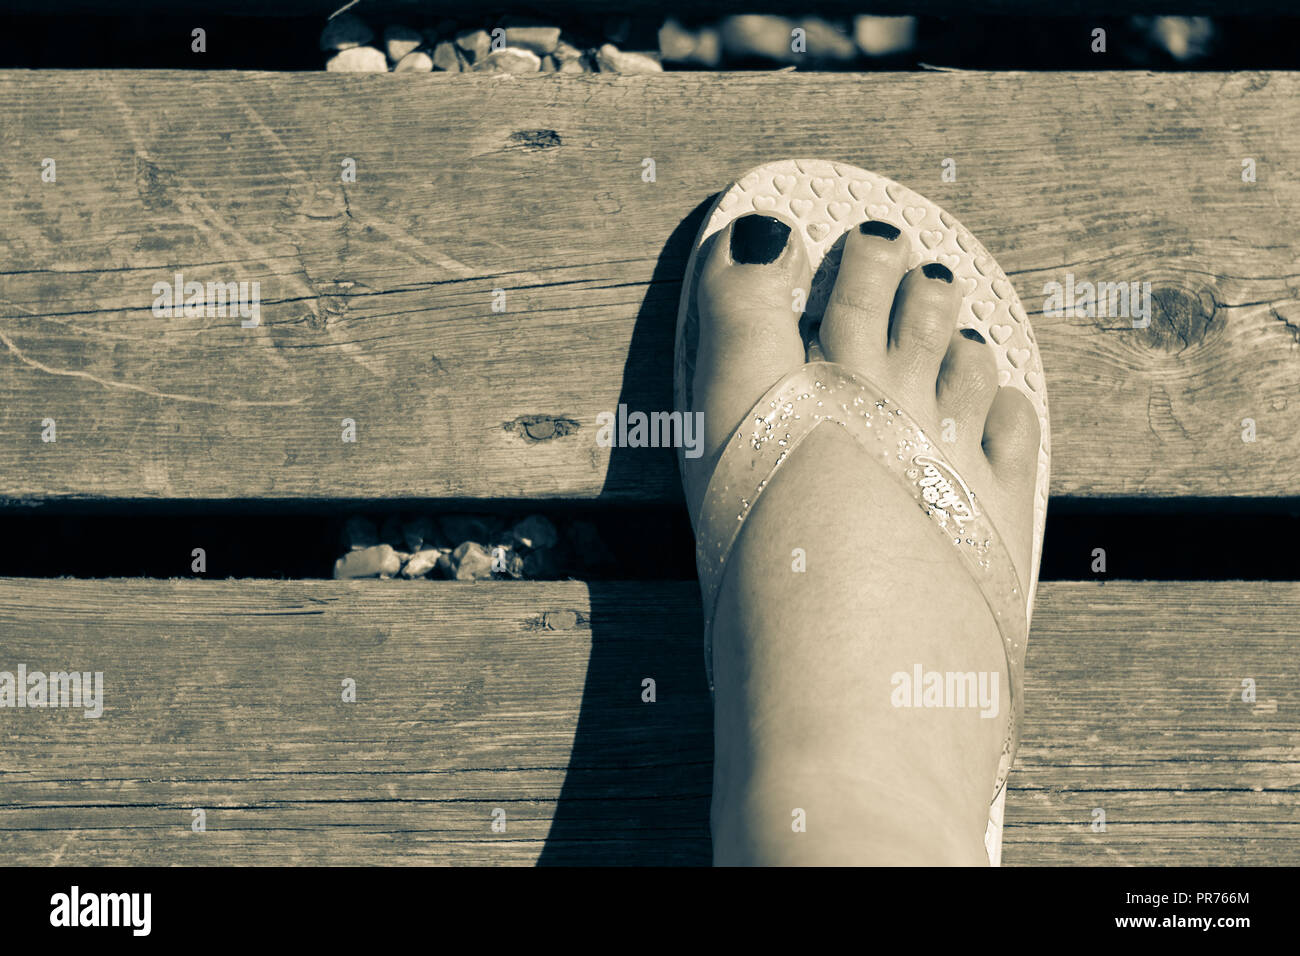 Close up of a foot wearing a flip flop standing on  a wooden boardwalk Stock Photo